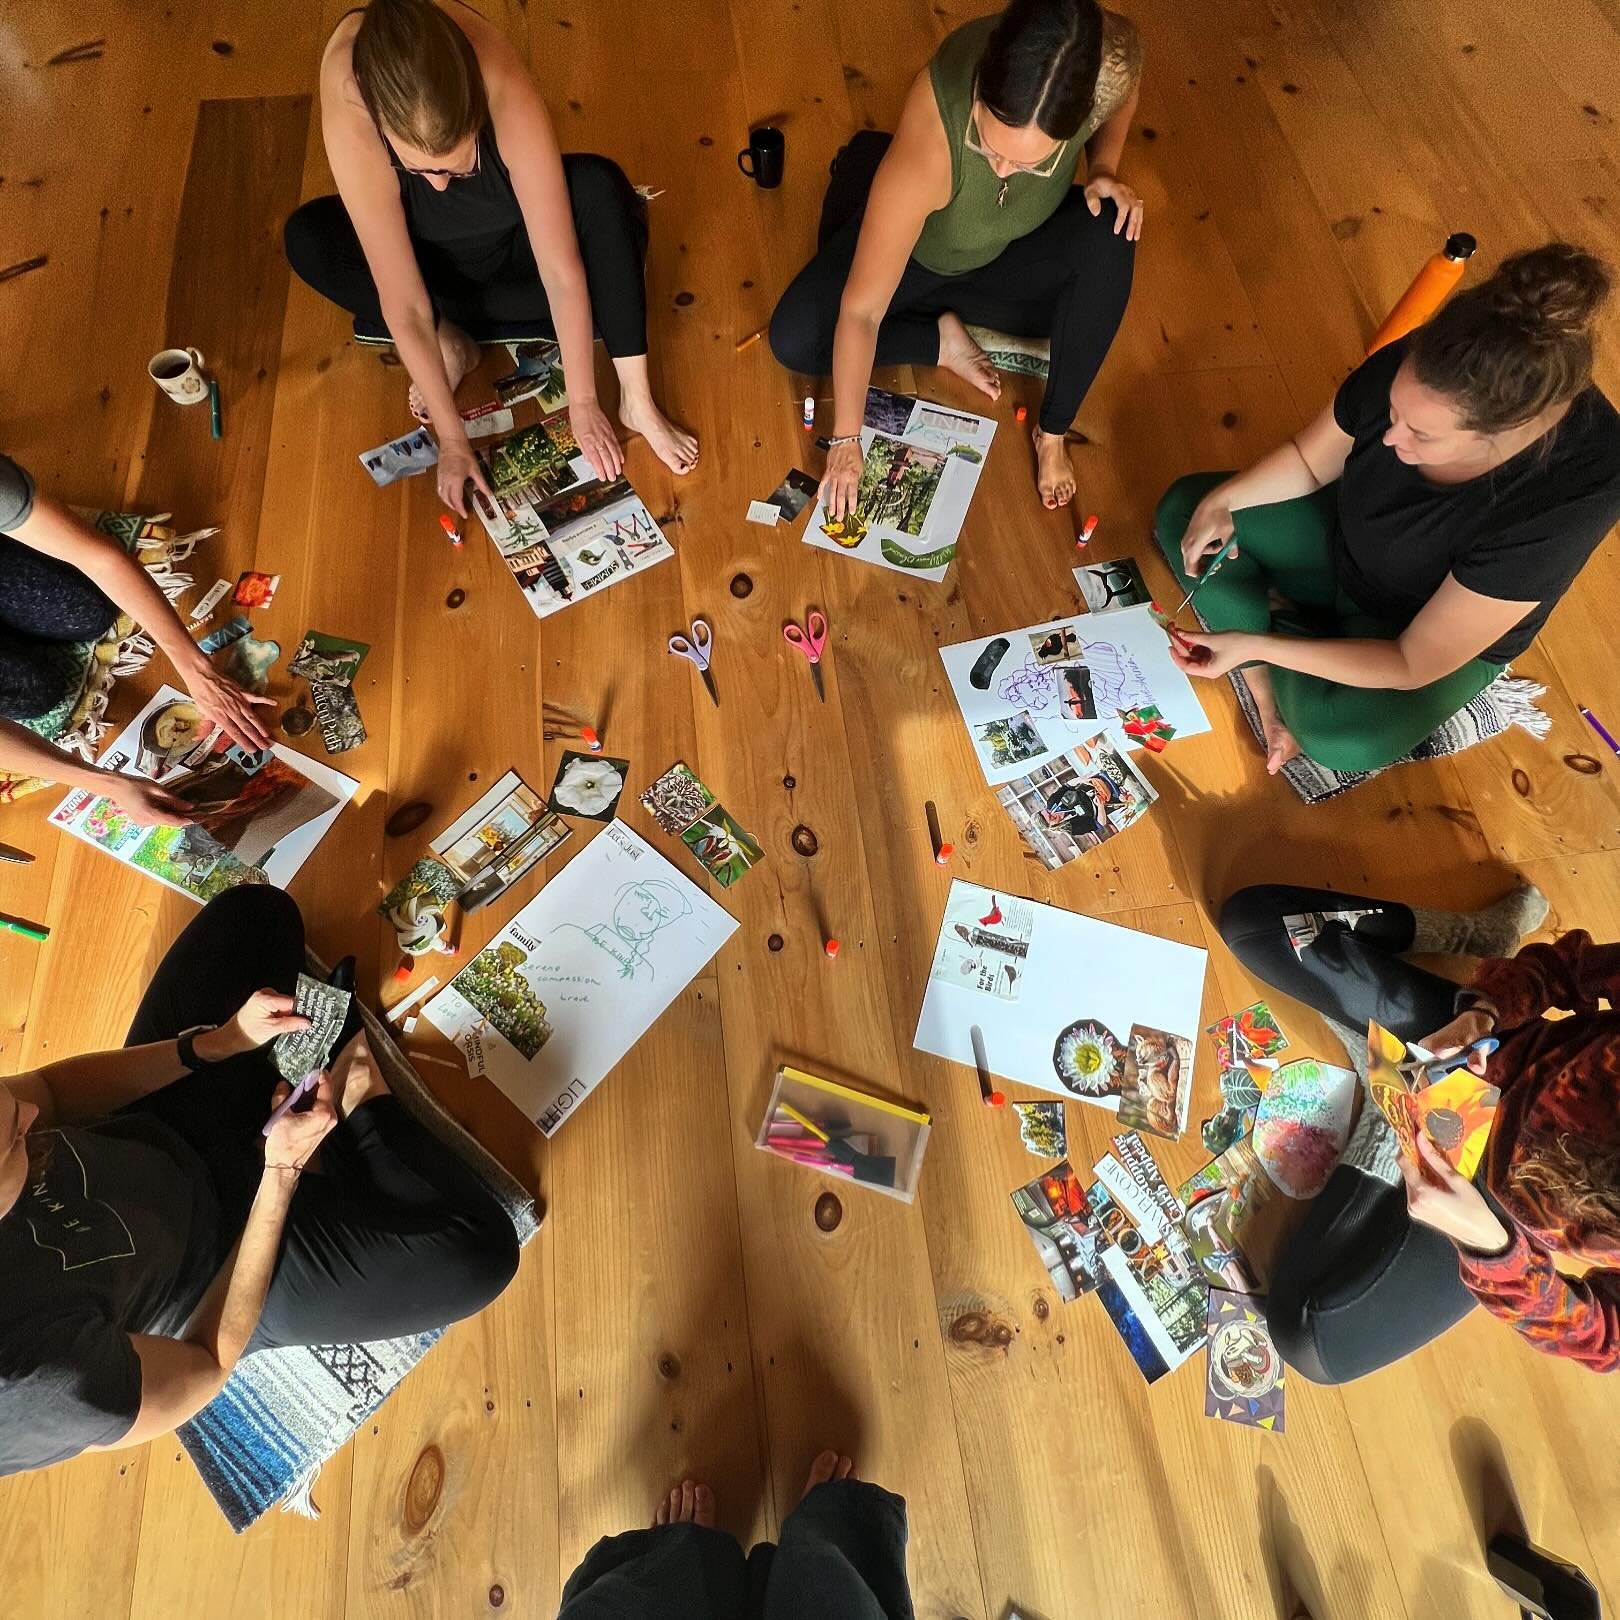 We are so excited to share activities on our retreats for participants to tap into their unique, playful, creative nature. The creative process we gently guide during our retreats is one that encourages imagination, exploration, and curiosity. It&rsq